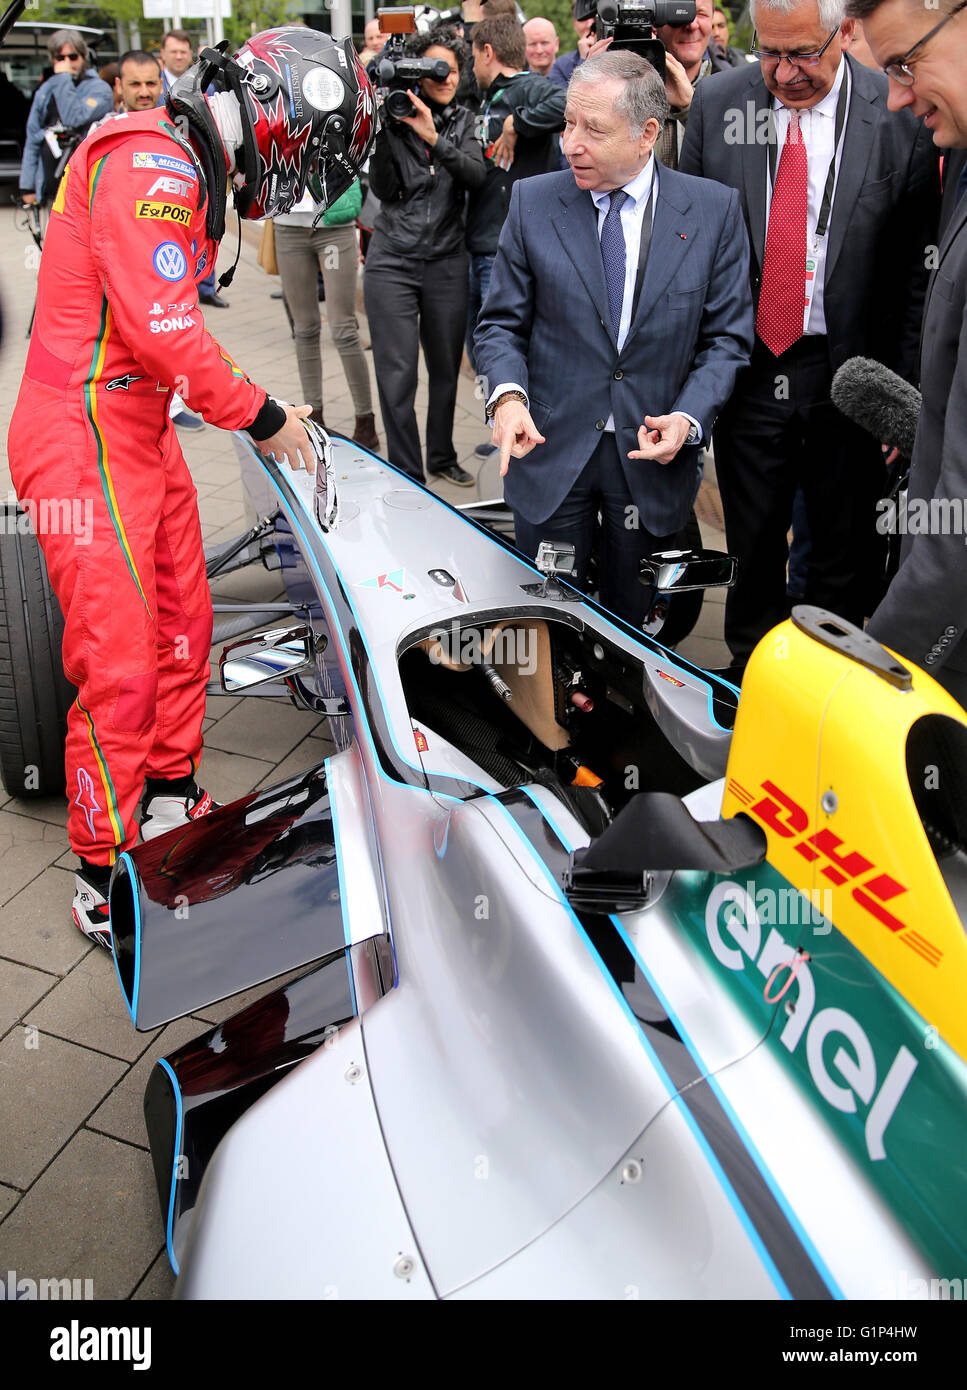 Leipzig, Germany. 18th May, 2016. Jean Todt (C-R), president of the International Automobile Federation (FIA), speaks to racing driver Daniel Abt (L) during the presentation of an electric Formula E racing car at the world summit of transport ministers in Leipzig, Germany, 18 May 2016. Some 1,000 participants from 60 countries are expected to attend the three-day summit held by the International Transport Forum of the Organisation for Economic Co-operation and Development (OECD). Photo: JAN WOITAS/dpa/Alamy Live News Stock Photo